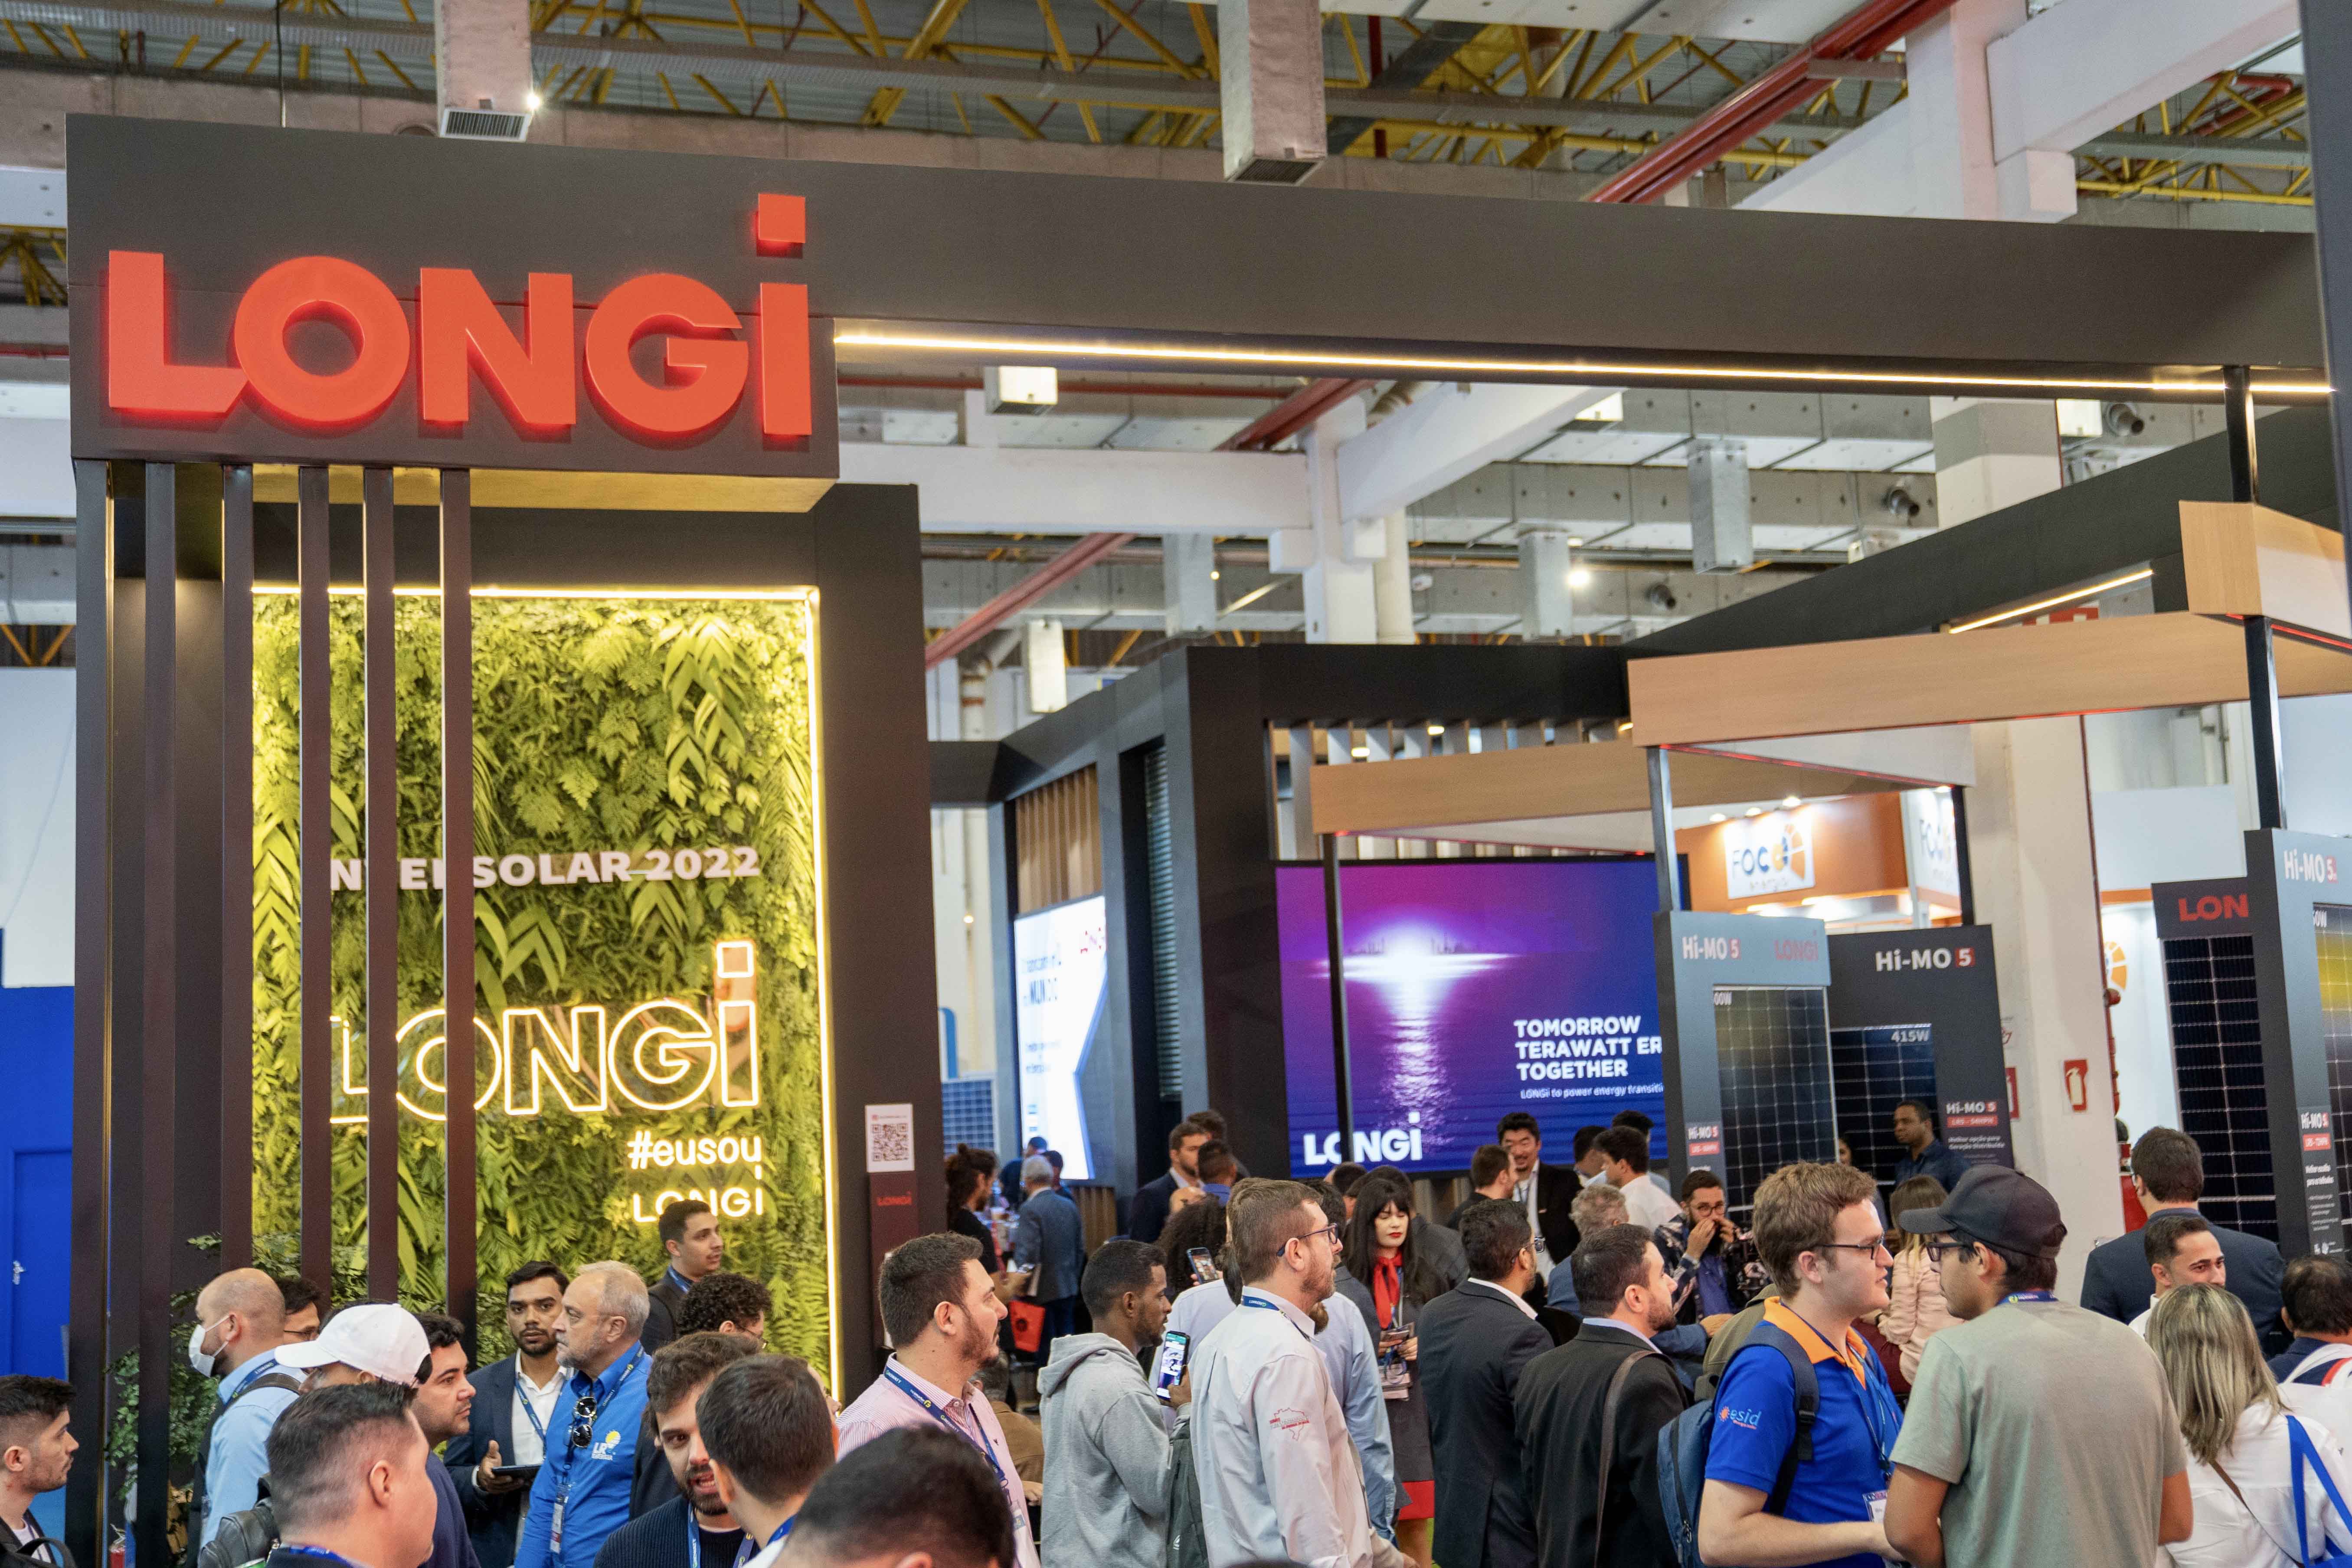 LONGi takes part in Intersolar South America 2022, collaborating with